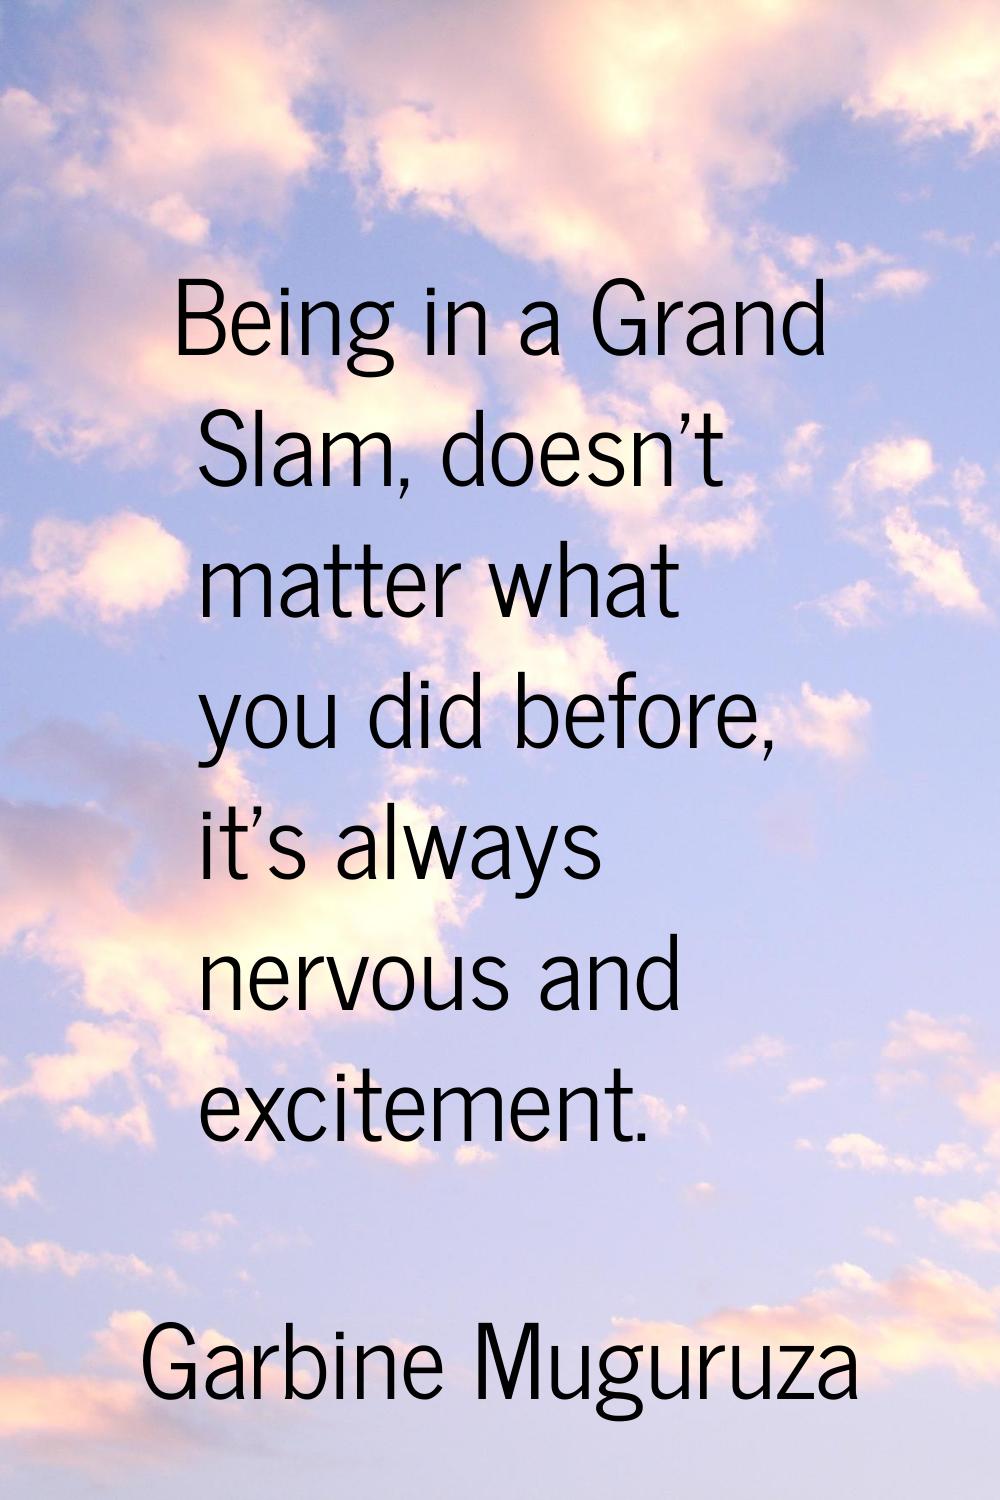 Being in a Grand Slam, doesn't matter what you did before, it's always nervous and excitement.